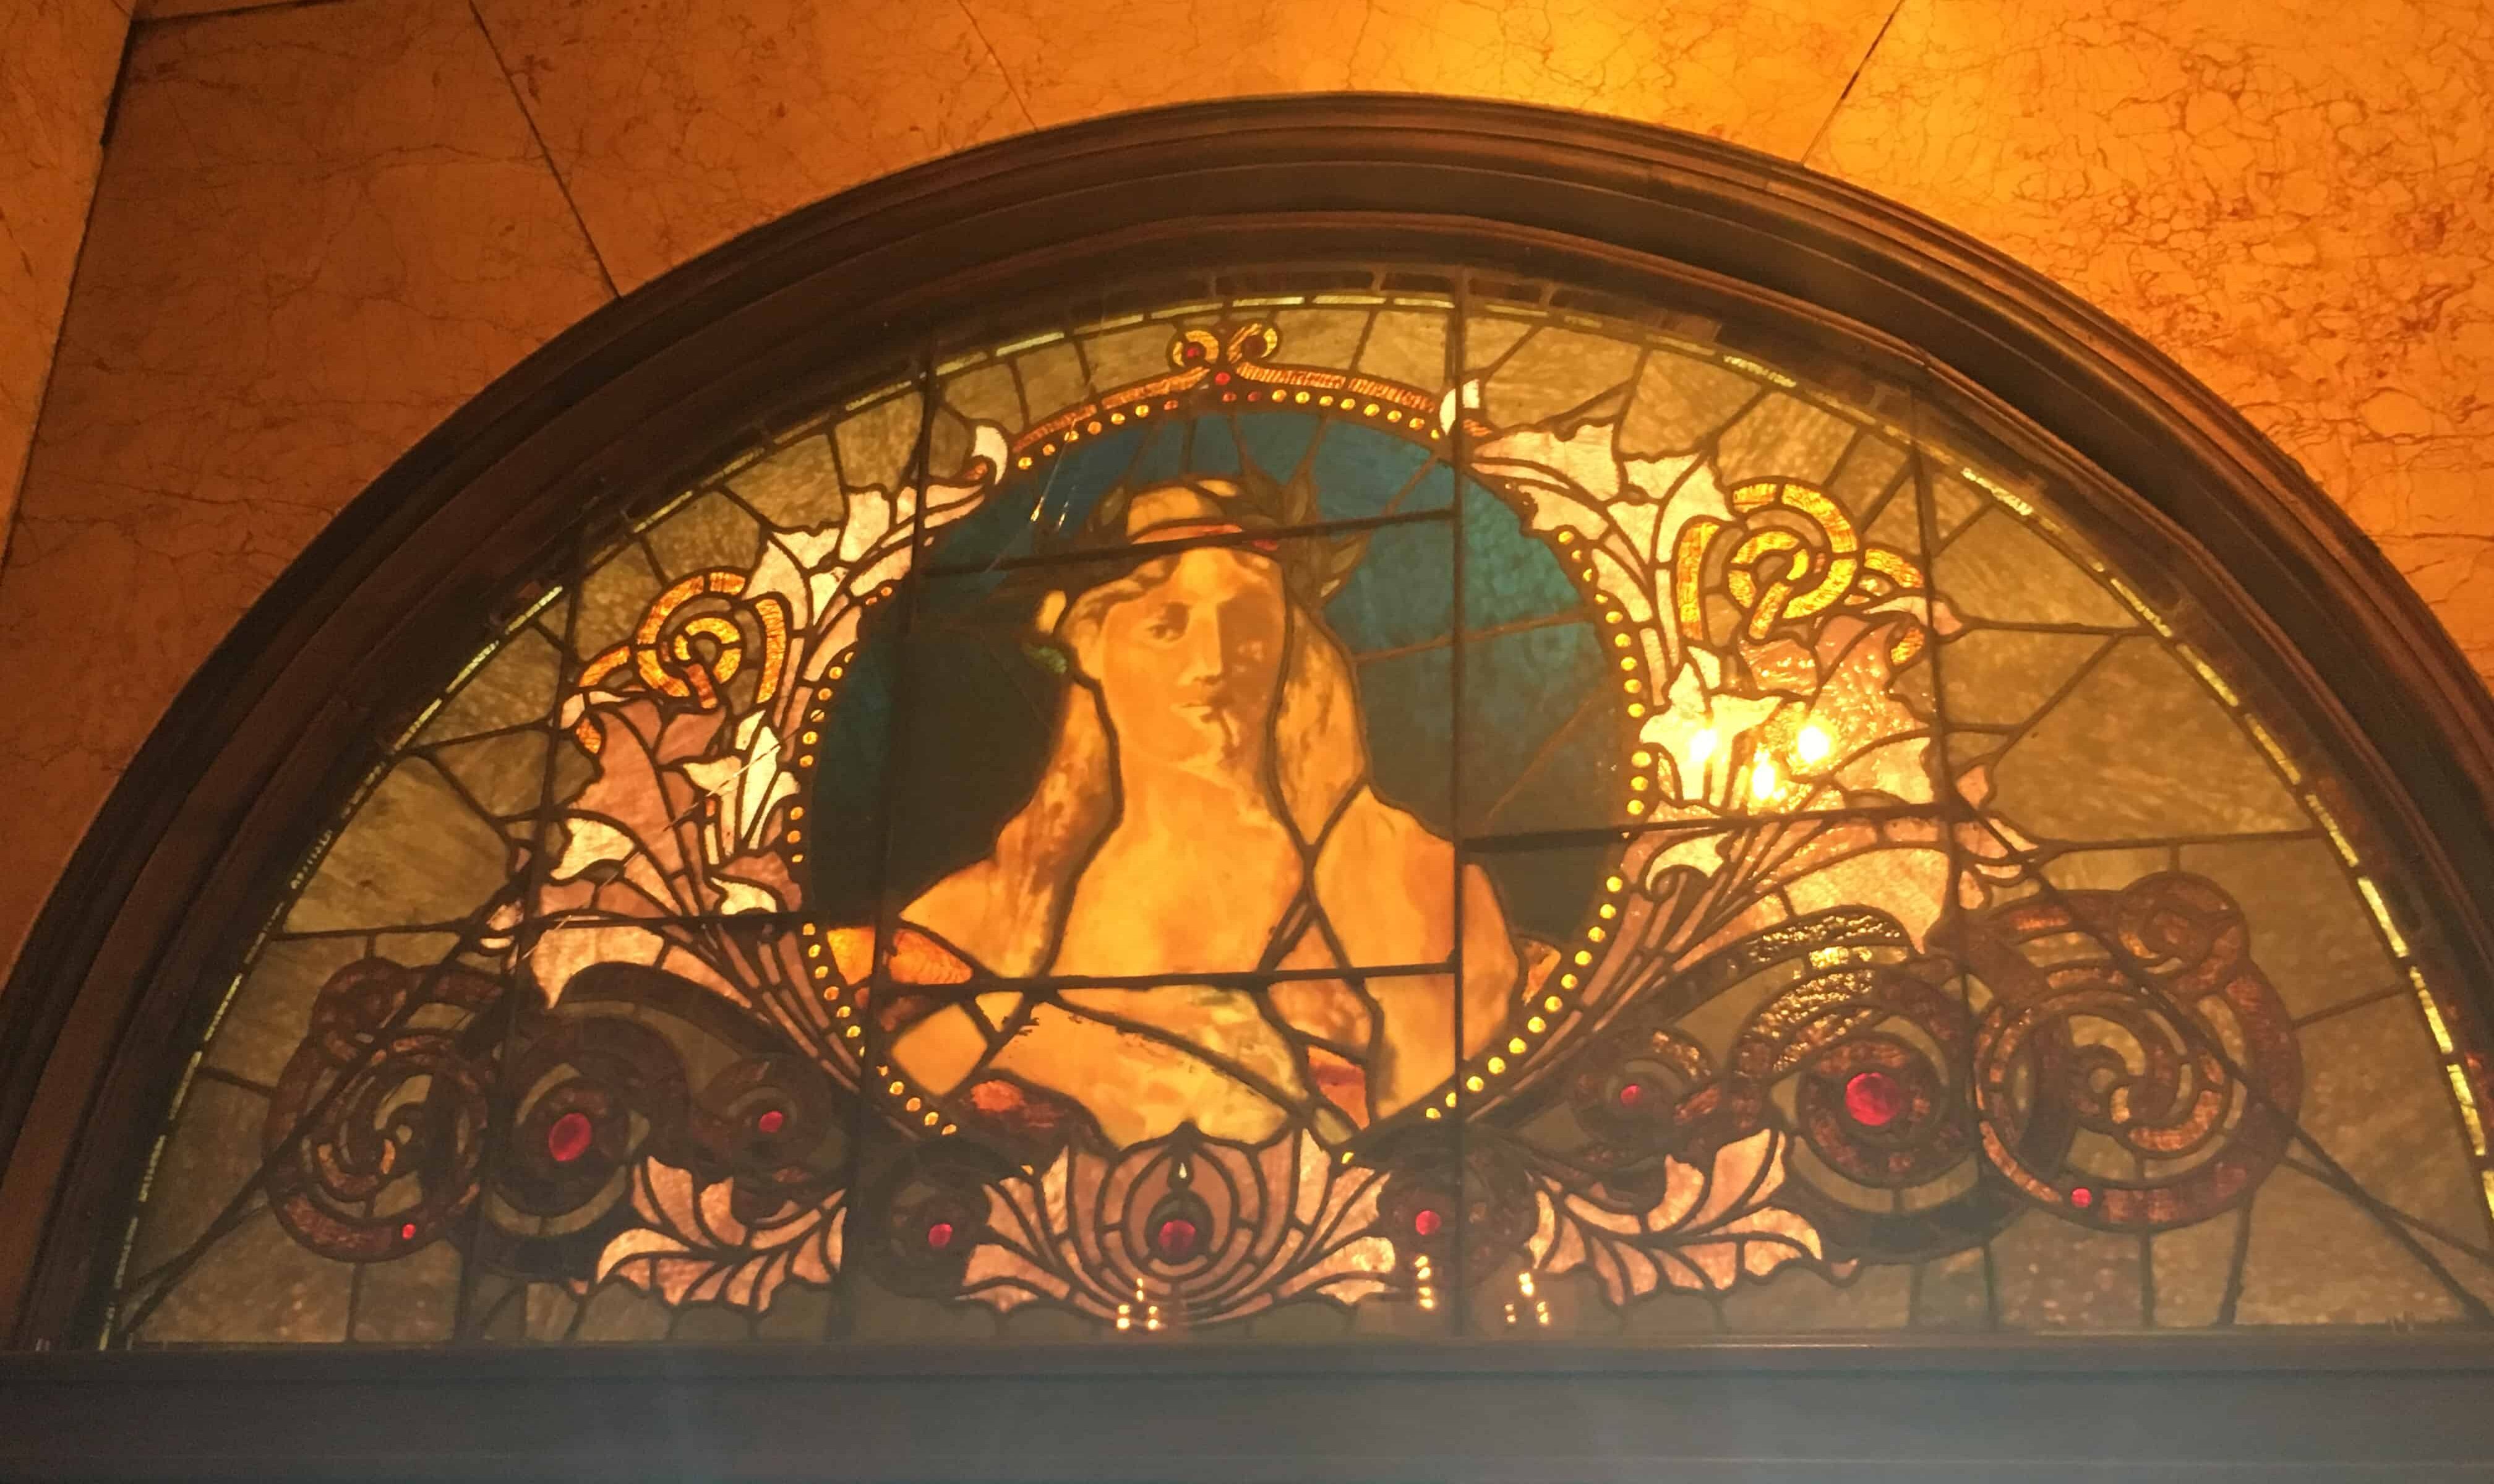 Stained glass in the Auditorium Theatre in Chicago, Illinois